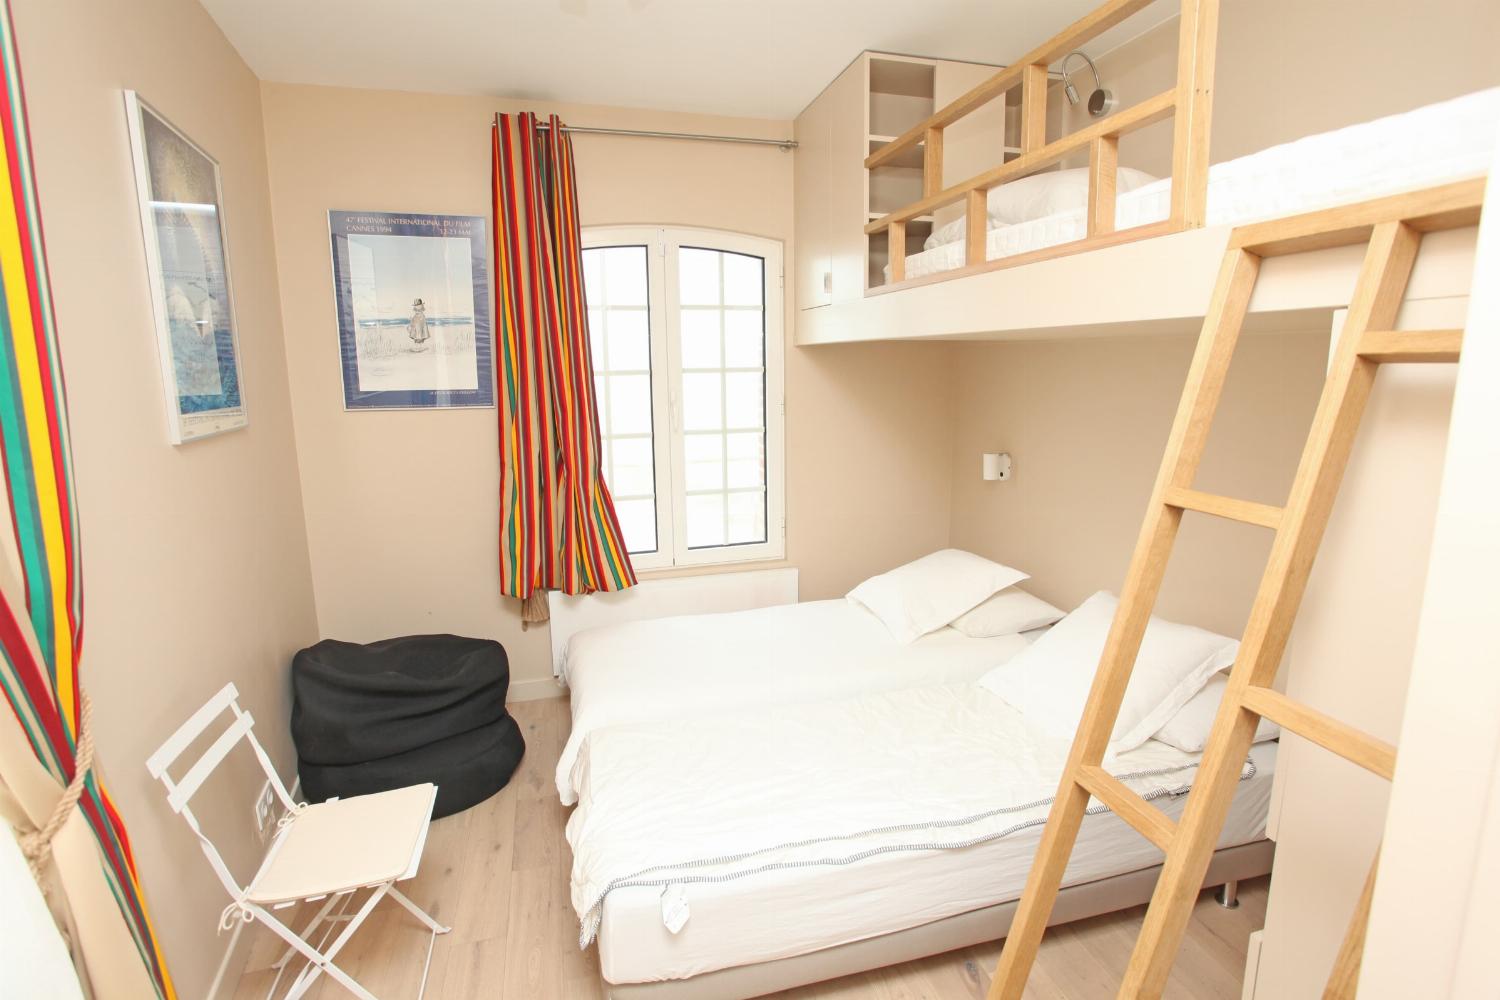 Bedroom | Rental home in Brittany